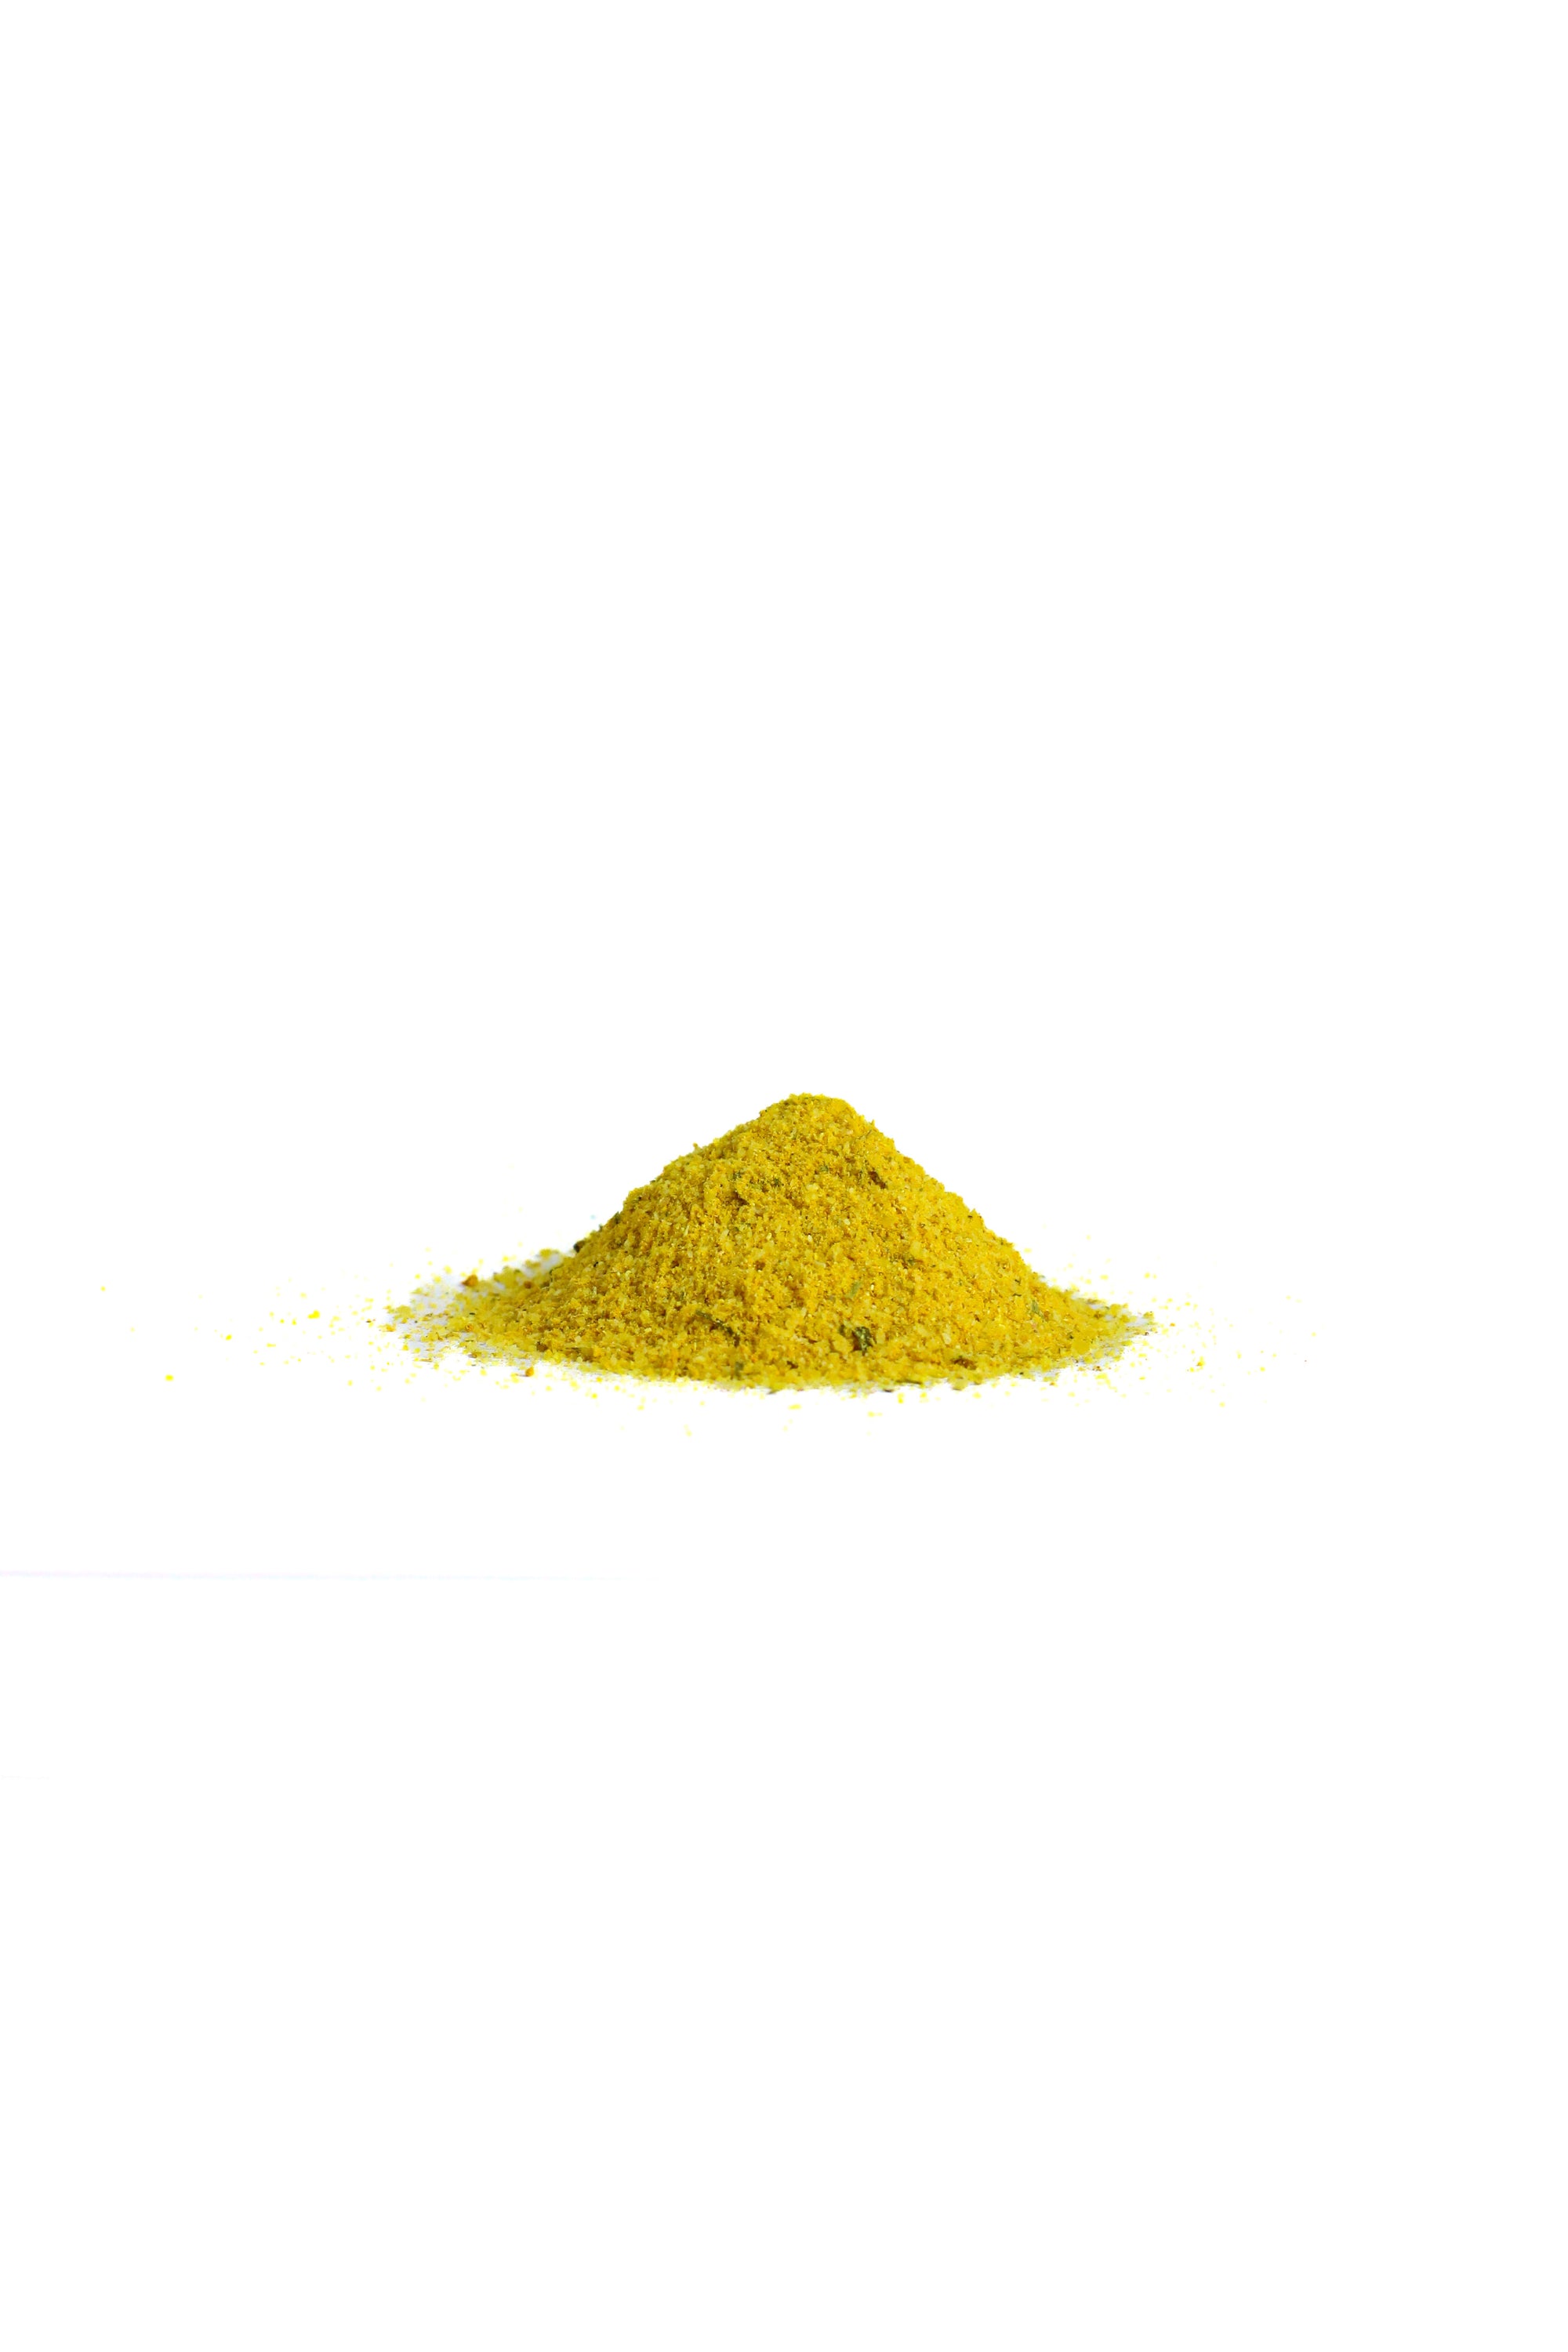 Spice For Rice (CATER-Q) 1KG